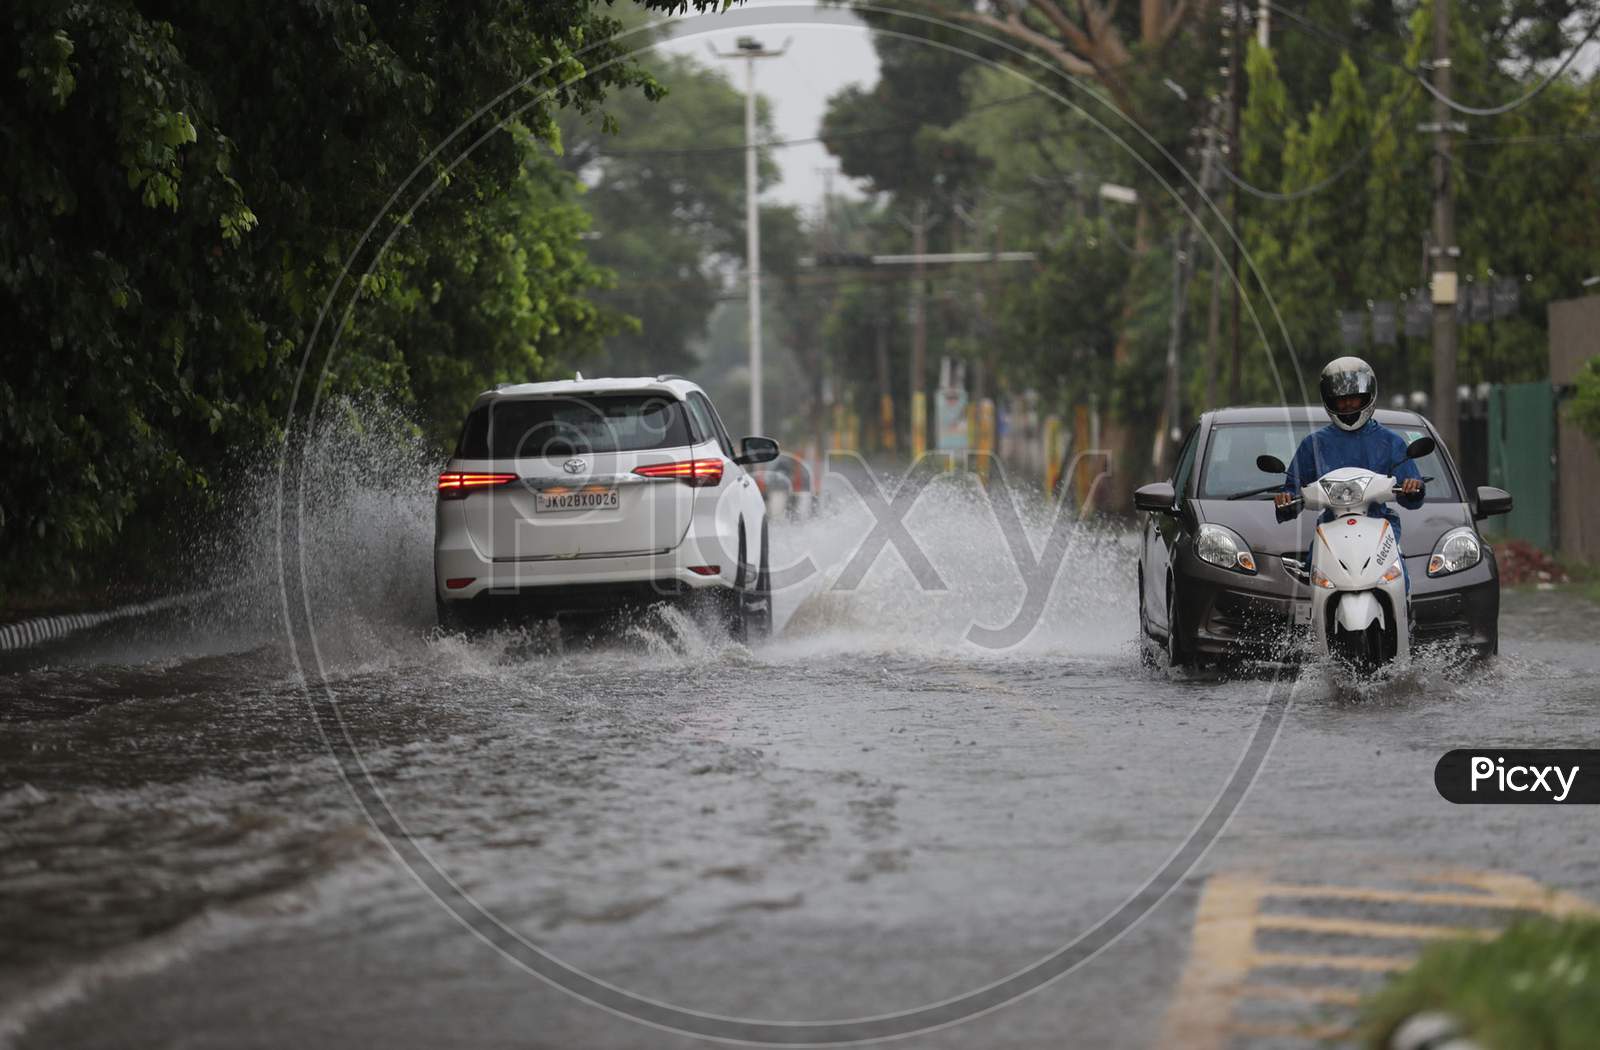 People drive through a street during rains on the outskirts of Jammu on July 29, 2020.